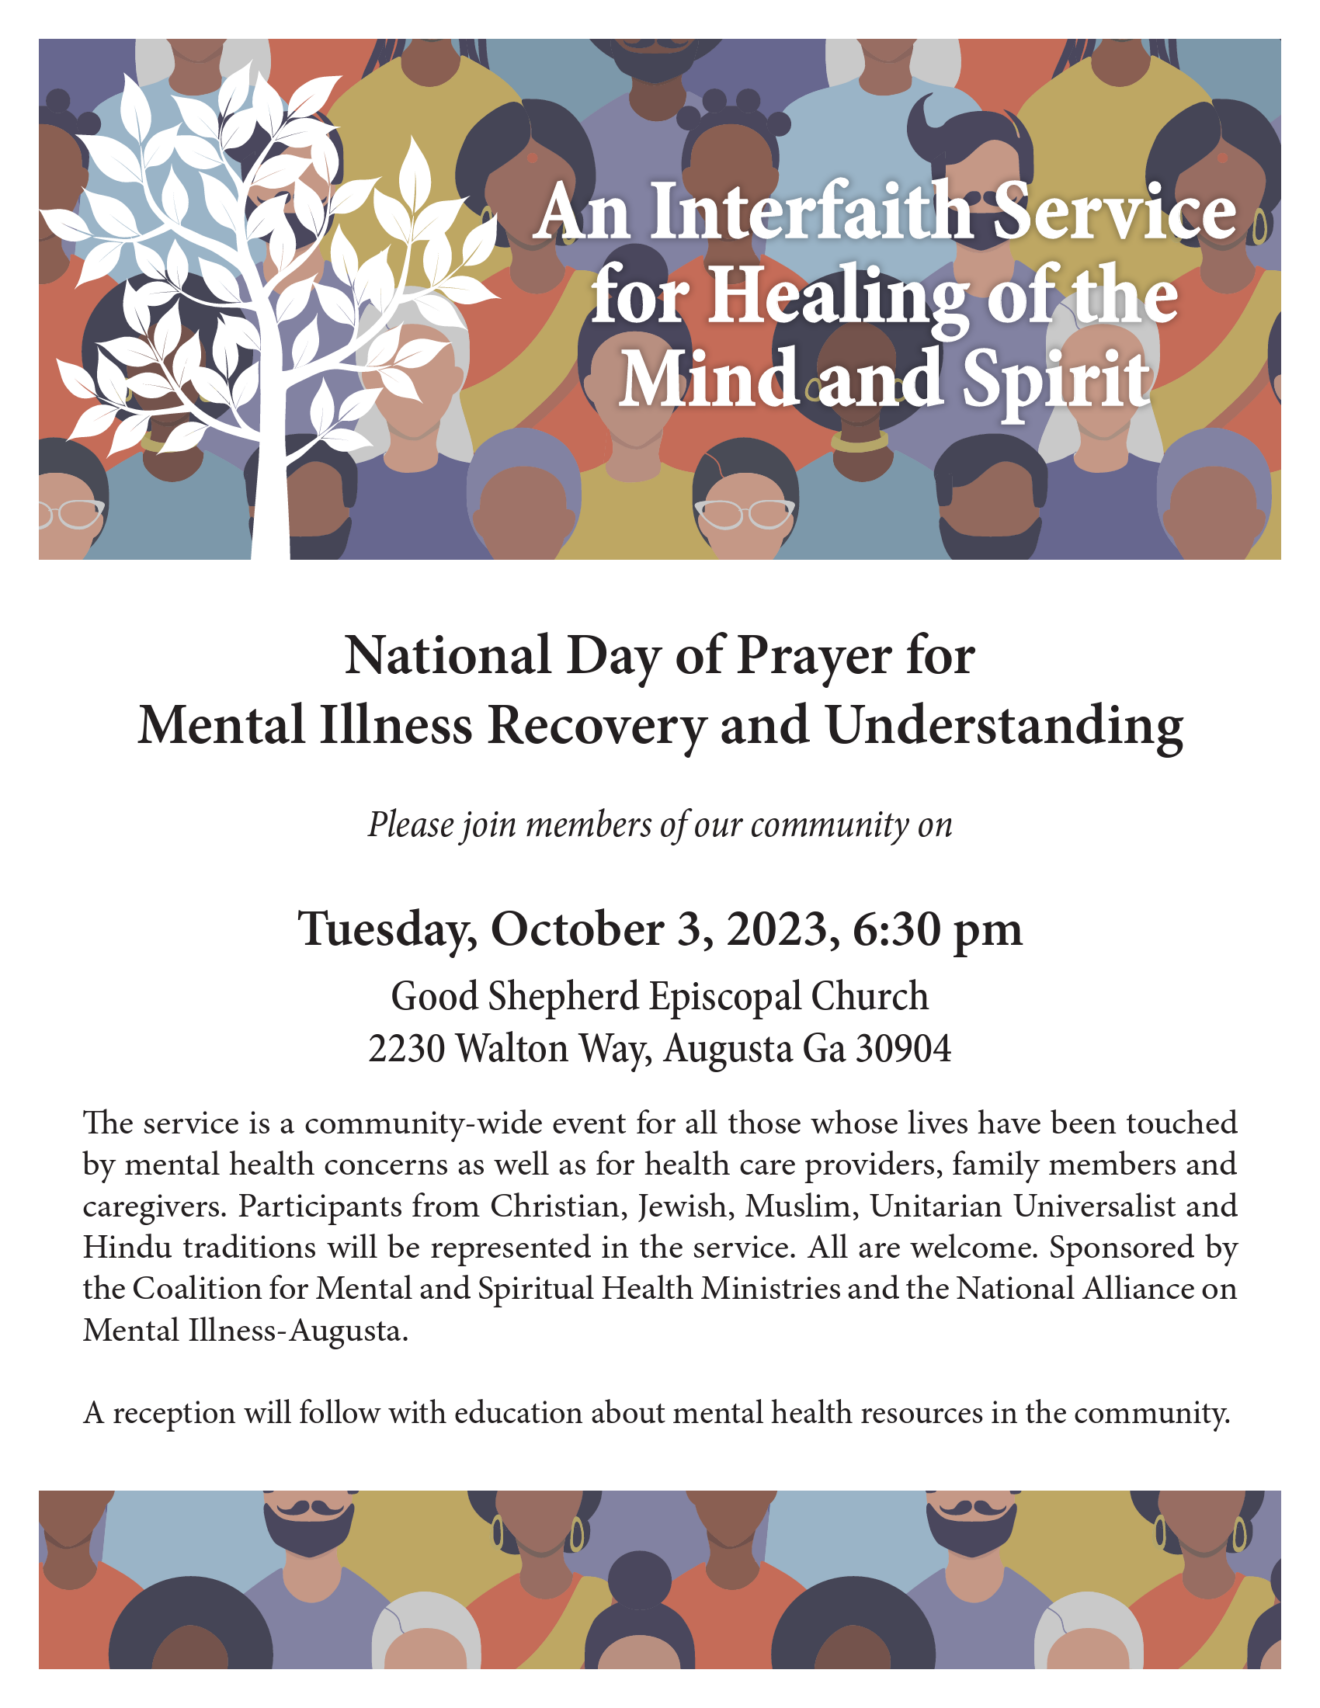 National Day of Prayer for Mental illness recovery and understanding